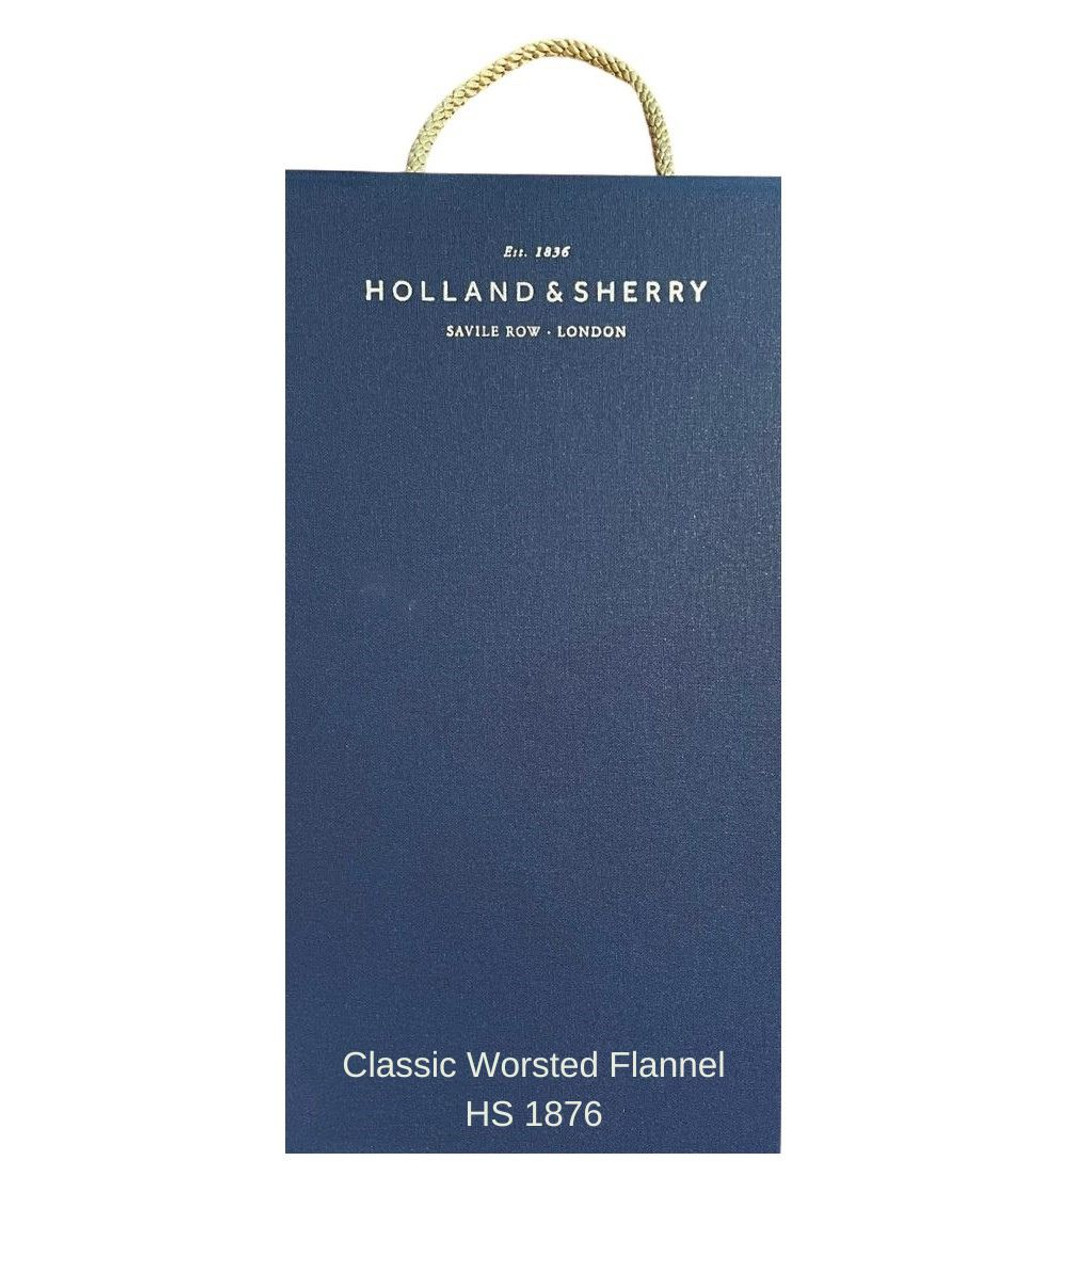 HS 1876 Classic Worsted Flannel by Holland & Sherry Apparel - Issuu